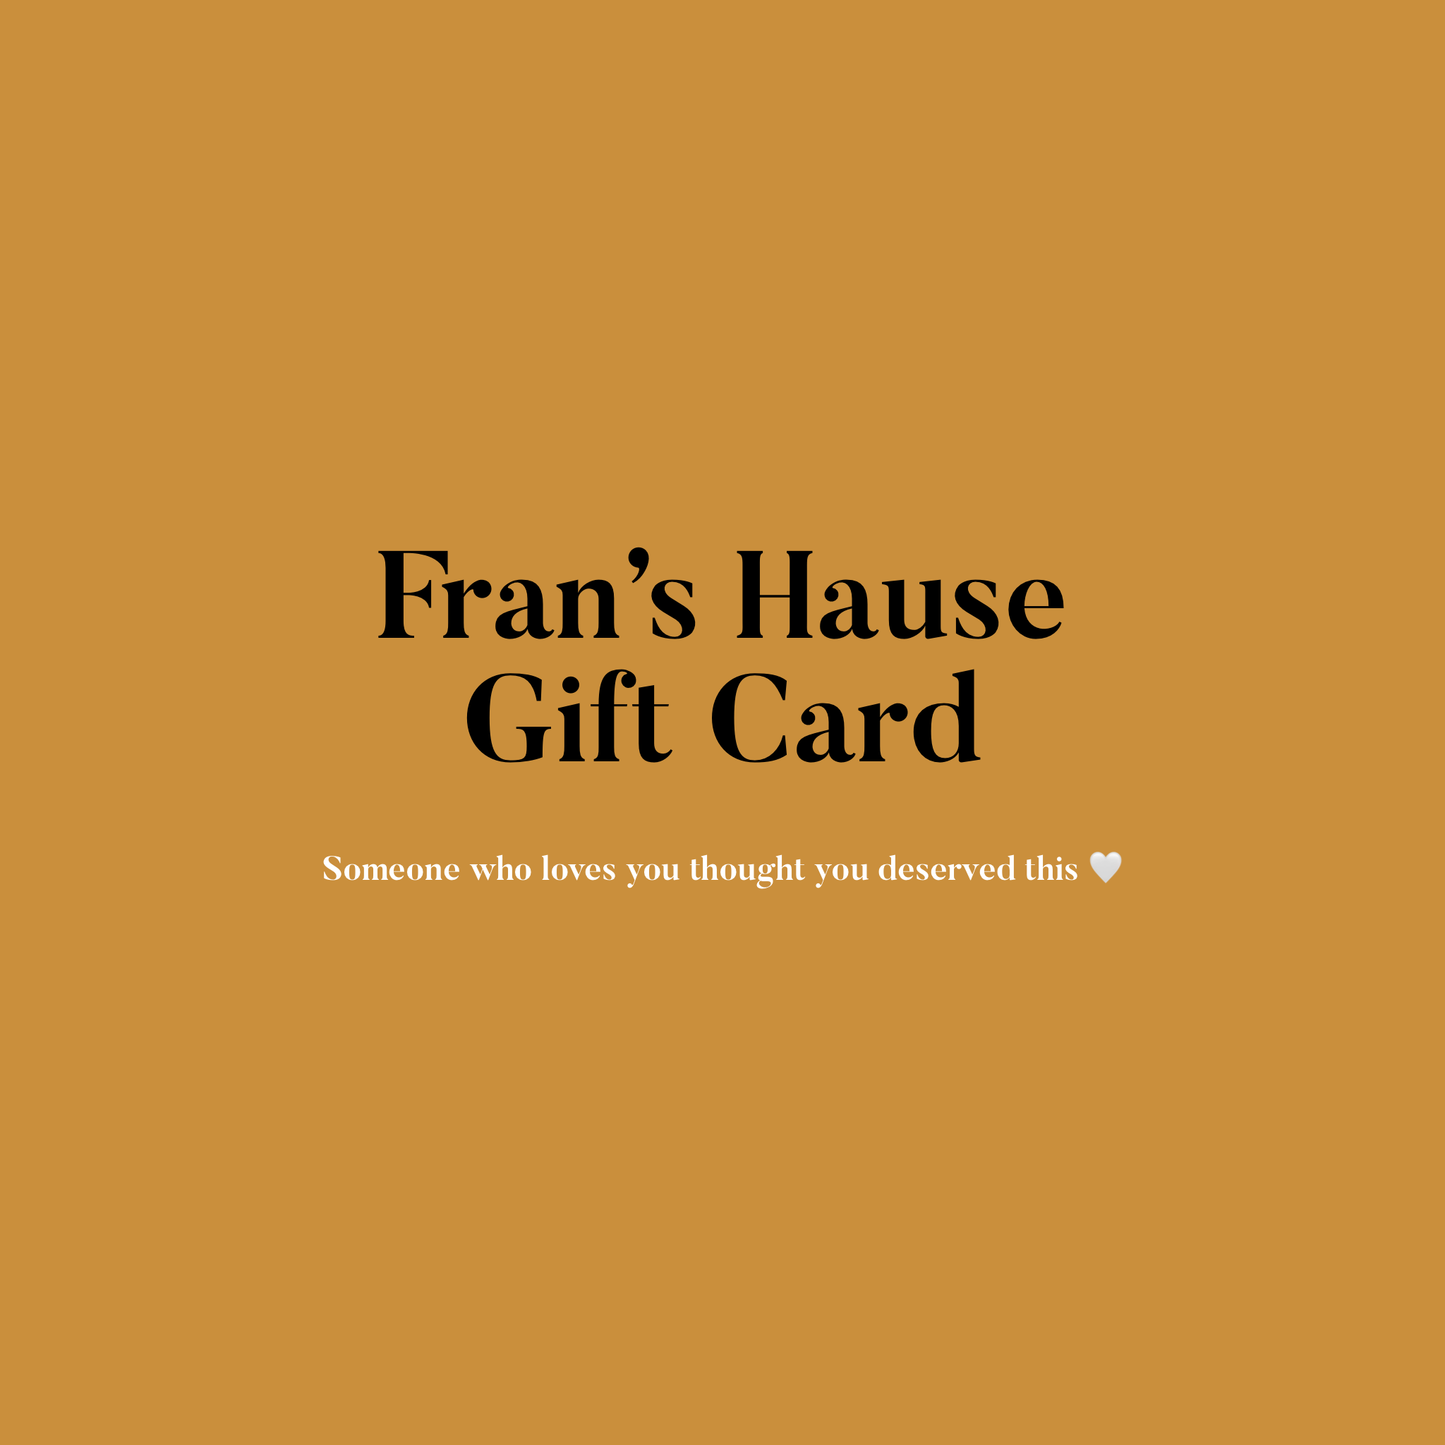 Fran's Hause Gift Card